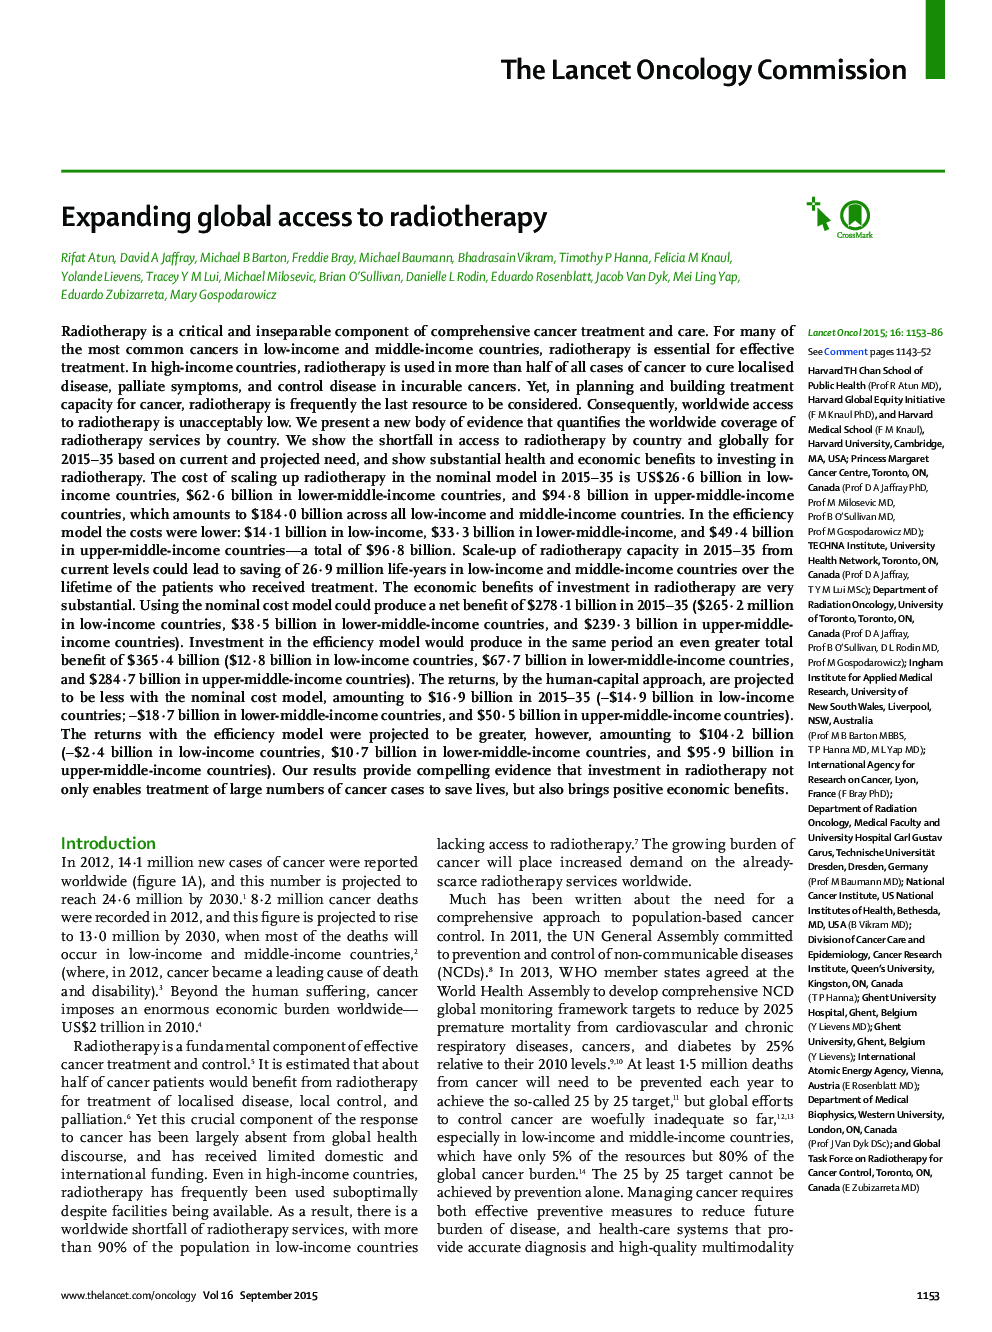 Expanding global access to radiotherapy